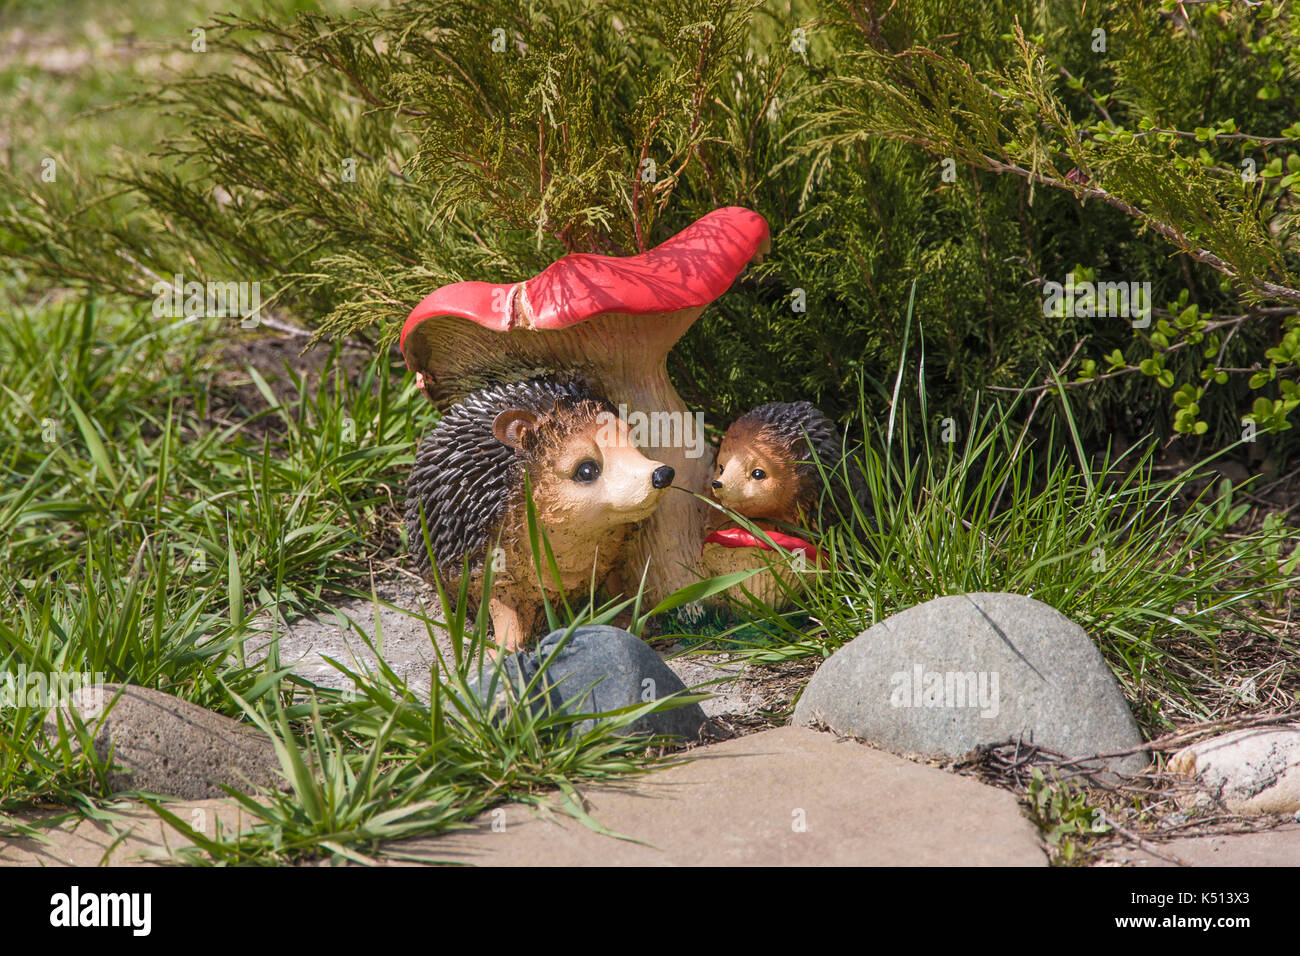 Toy Hedgehogs and mushroom in Park Stock Photo